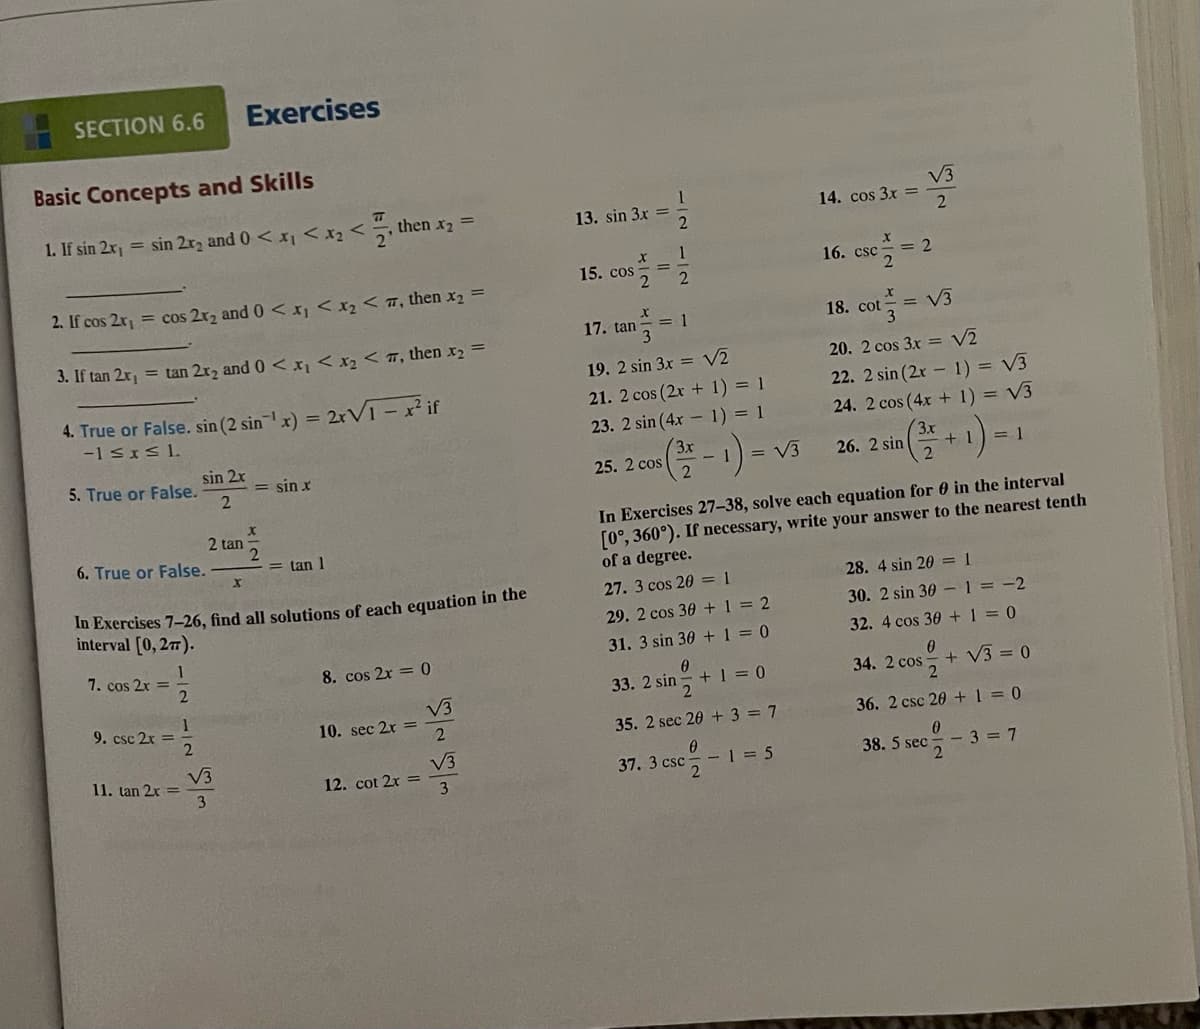 SECTION 6.6
Exercises
Basic Concepts and Skills
1. If sin 2x, = sin 2r2 and 0 < x, < x2 < then x2 =
1
13. sin 3x =
V3
14. cos 3x =
2'
1
16. csc 2
= 2
15. cos
2. If cos 2x = cos 2r, and 0 <x <x, < , then x2 =
17. tan
18. cot = V3
= 1
3. If tan 2x, = tan 2r2 and 0 <x < x2 < T, then x2 =
3
19. 2 sin 3x = V2
20. 2 cos 3.x = V2
4. True or False. sin (2 sinx) =
-1 SIS1.
21V1 - x² if
21. 2 cos (2r + 1) = 1
23. 2 sin (4x - 1) = 1
22. 2 sin (2x - 1) = V3
24. 2 cos (4x + 1) = V3
sin 2r
5. True or False.
= V3
3x
26. 2 sin
= sin x
25. 2 cos
= 1
In Exercises 27–38, solve each equation for 0 in the interval
[0°, 360°). If necessary, write your answer to the nearest tenth
of a degree.
2 tan
2
6. True or False.
tan 1
28. 4 sin 20 = 1
In Exercises 7-26, find all solutions of each equation in the
interval (0,27).
27. 3 cos 20 = 1
29. 2 cos 30 + 1 = 2
30. 2 sin 30 –1 = -2
1
7. cos 2x =
31. 3 sin 30 + 1 = 0
32. 4 cos 30 +1 = 0
8. cos 2x = 0
33. 2 sin - + 1 = 0
2
34. 2 cos + V3 = 0
V3
10. sec 2x =
9. csc 2x =
35. 2 sec 20 + 3 = 7
36. 2 csc 20 +1 = 0
V3
11. tan 2x =
V3
12. cot 2x =
3
37. 3 csc-1 = 5
38. 5 sec - 3 = 7
3
